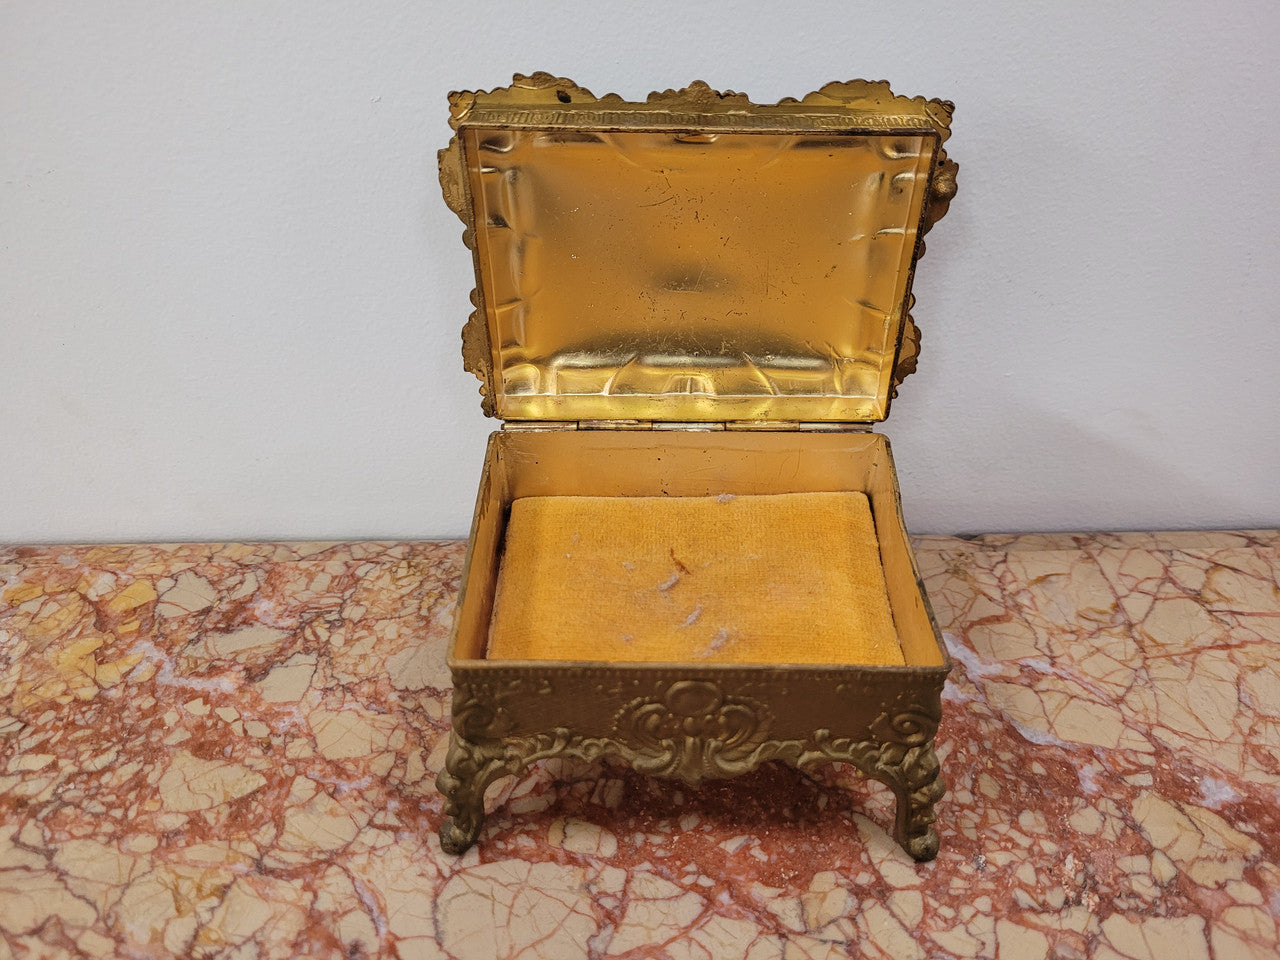 Lovely vintage gilded metal jewellery casket with cushion on the inside (can be removed).  In good original and detailed condition.